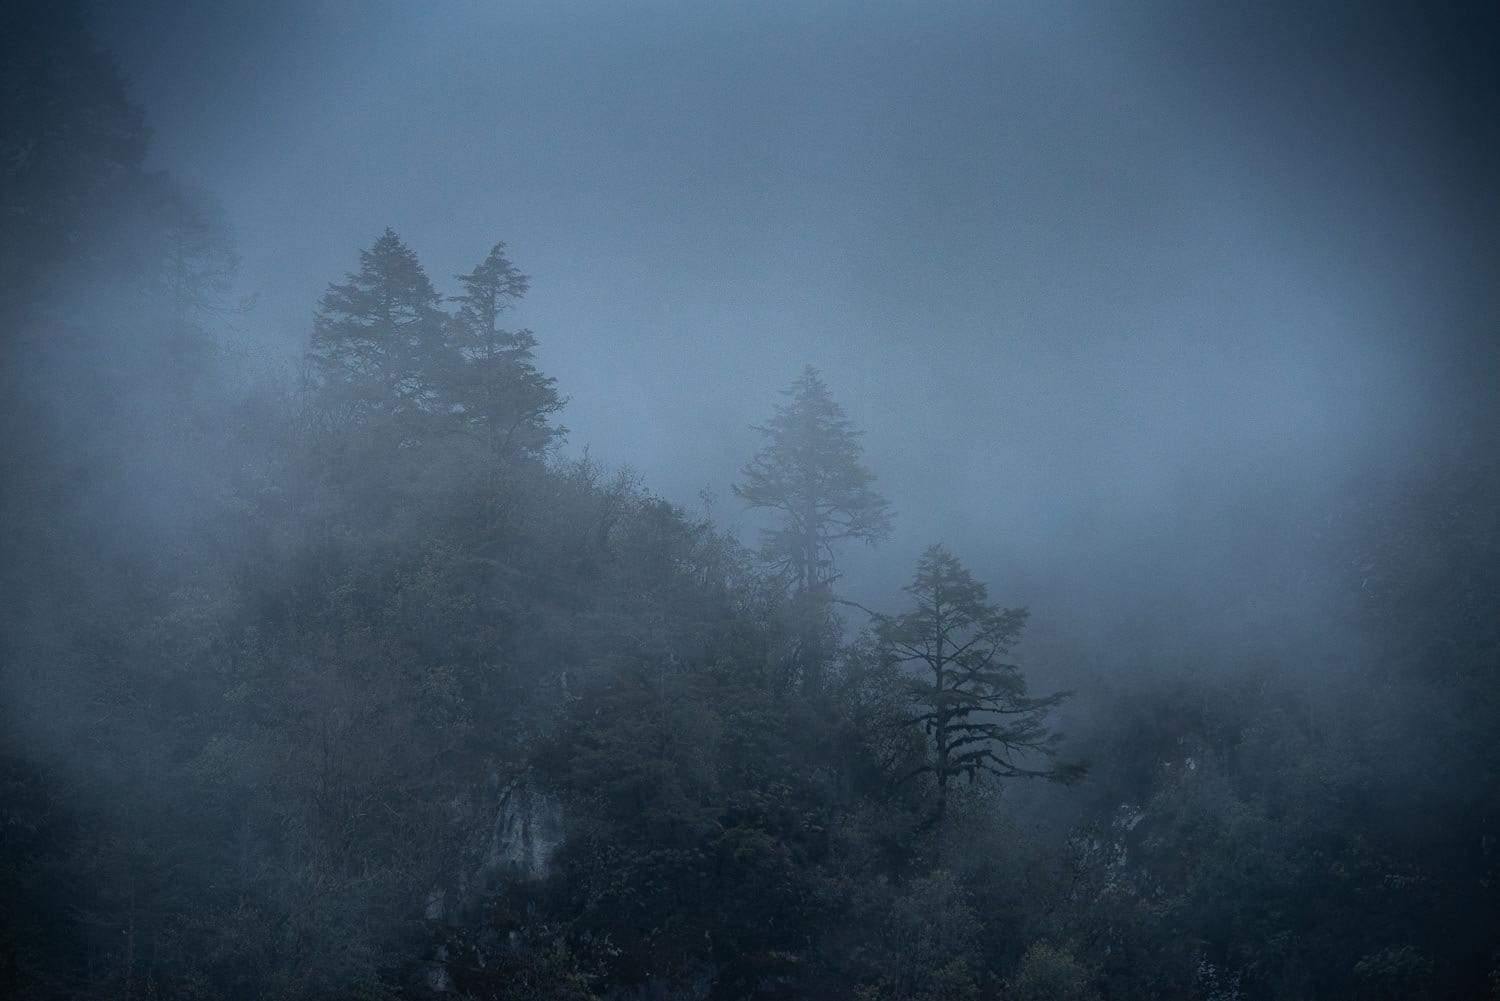 A smoky view of the forest with some trees standing tall and silence in the atmosphere of the night, Black Forest #4, Bhutan